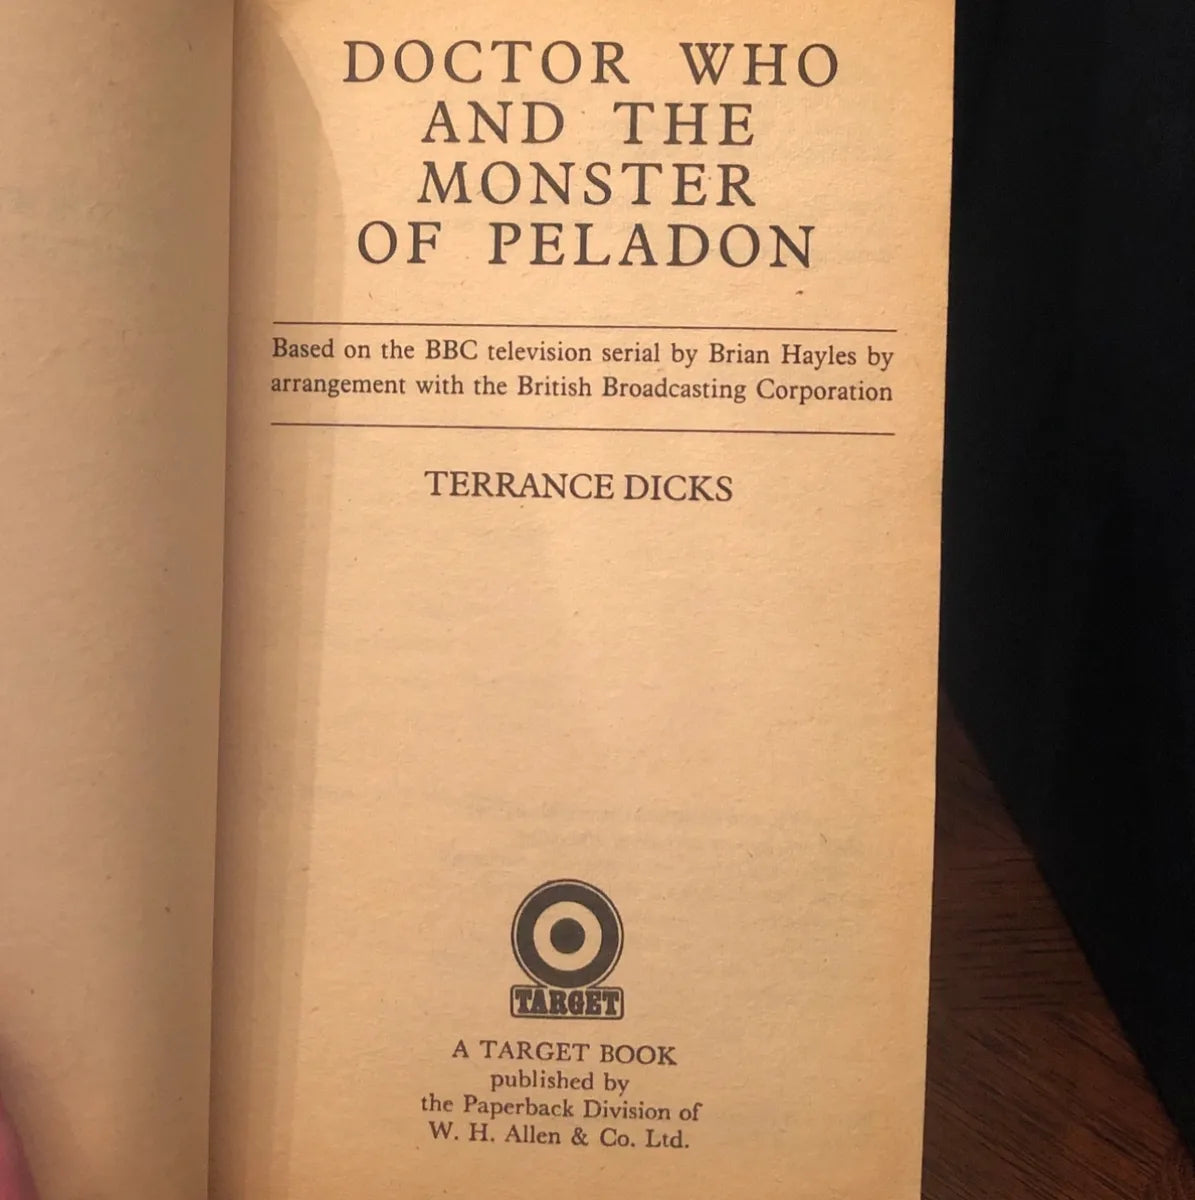 DOCTOR WHO AND THE MONSTER OF PELADON (1980) by Terrance Dicks